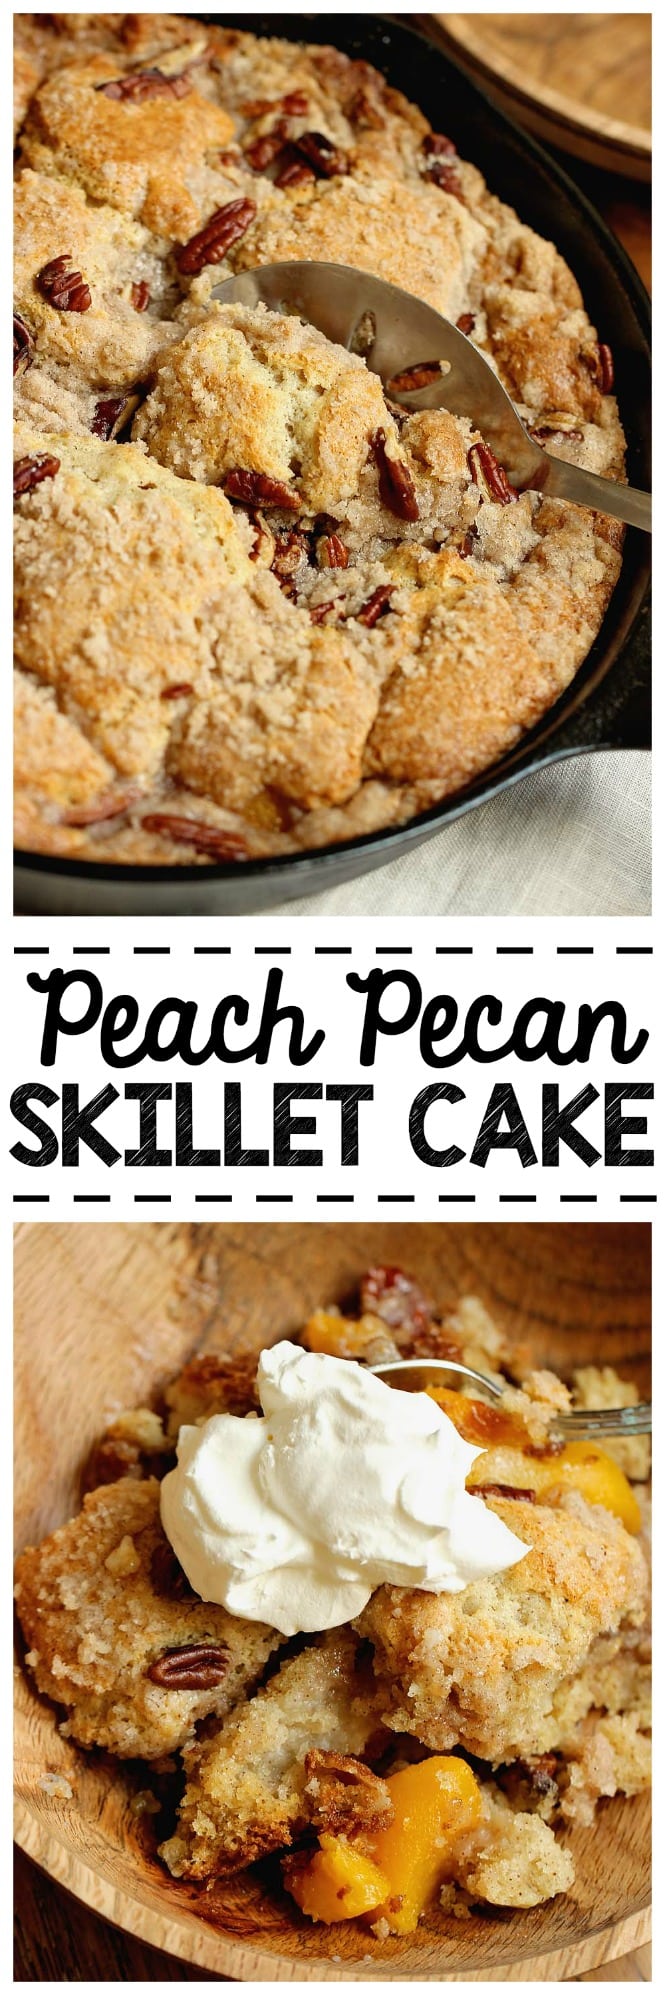 Easy Peach Pecan Skillet Cake - A simple and comforting peach dessert with some surprising ingredients in the batter that make this cake divine!